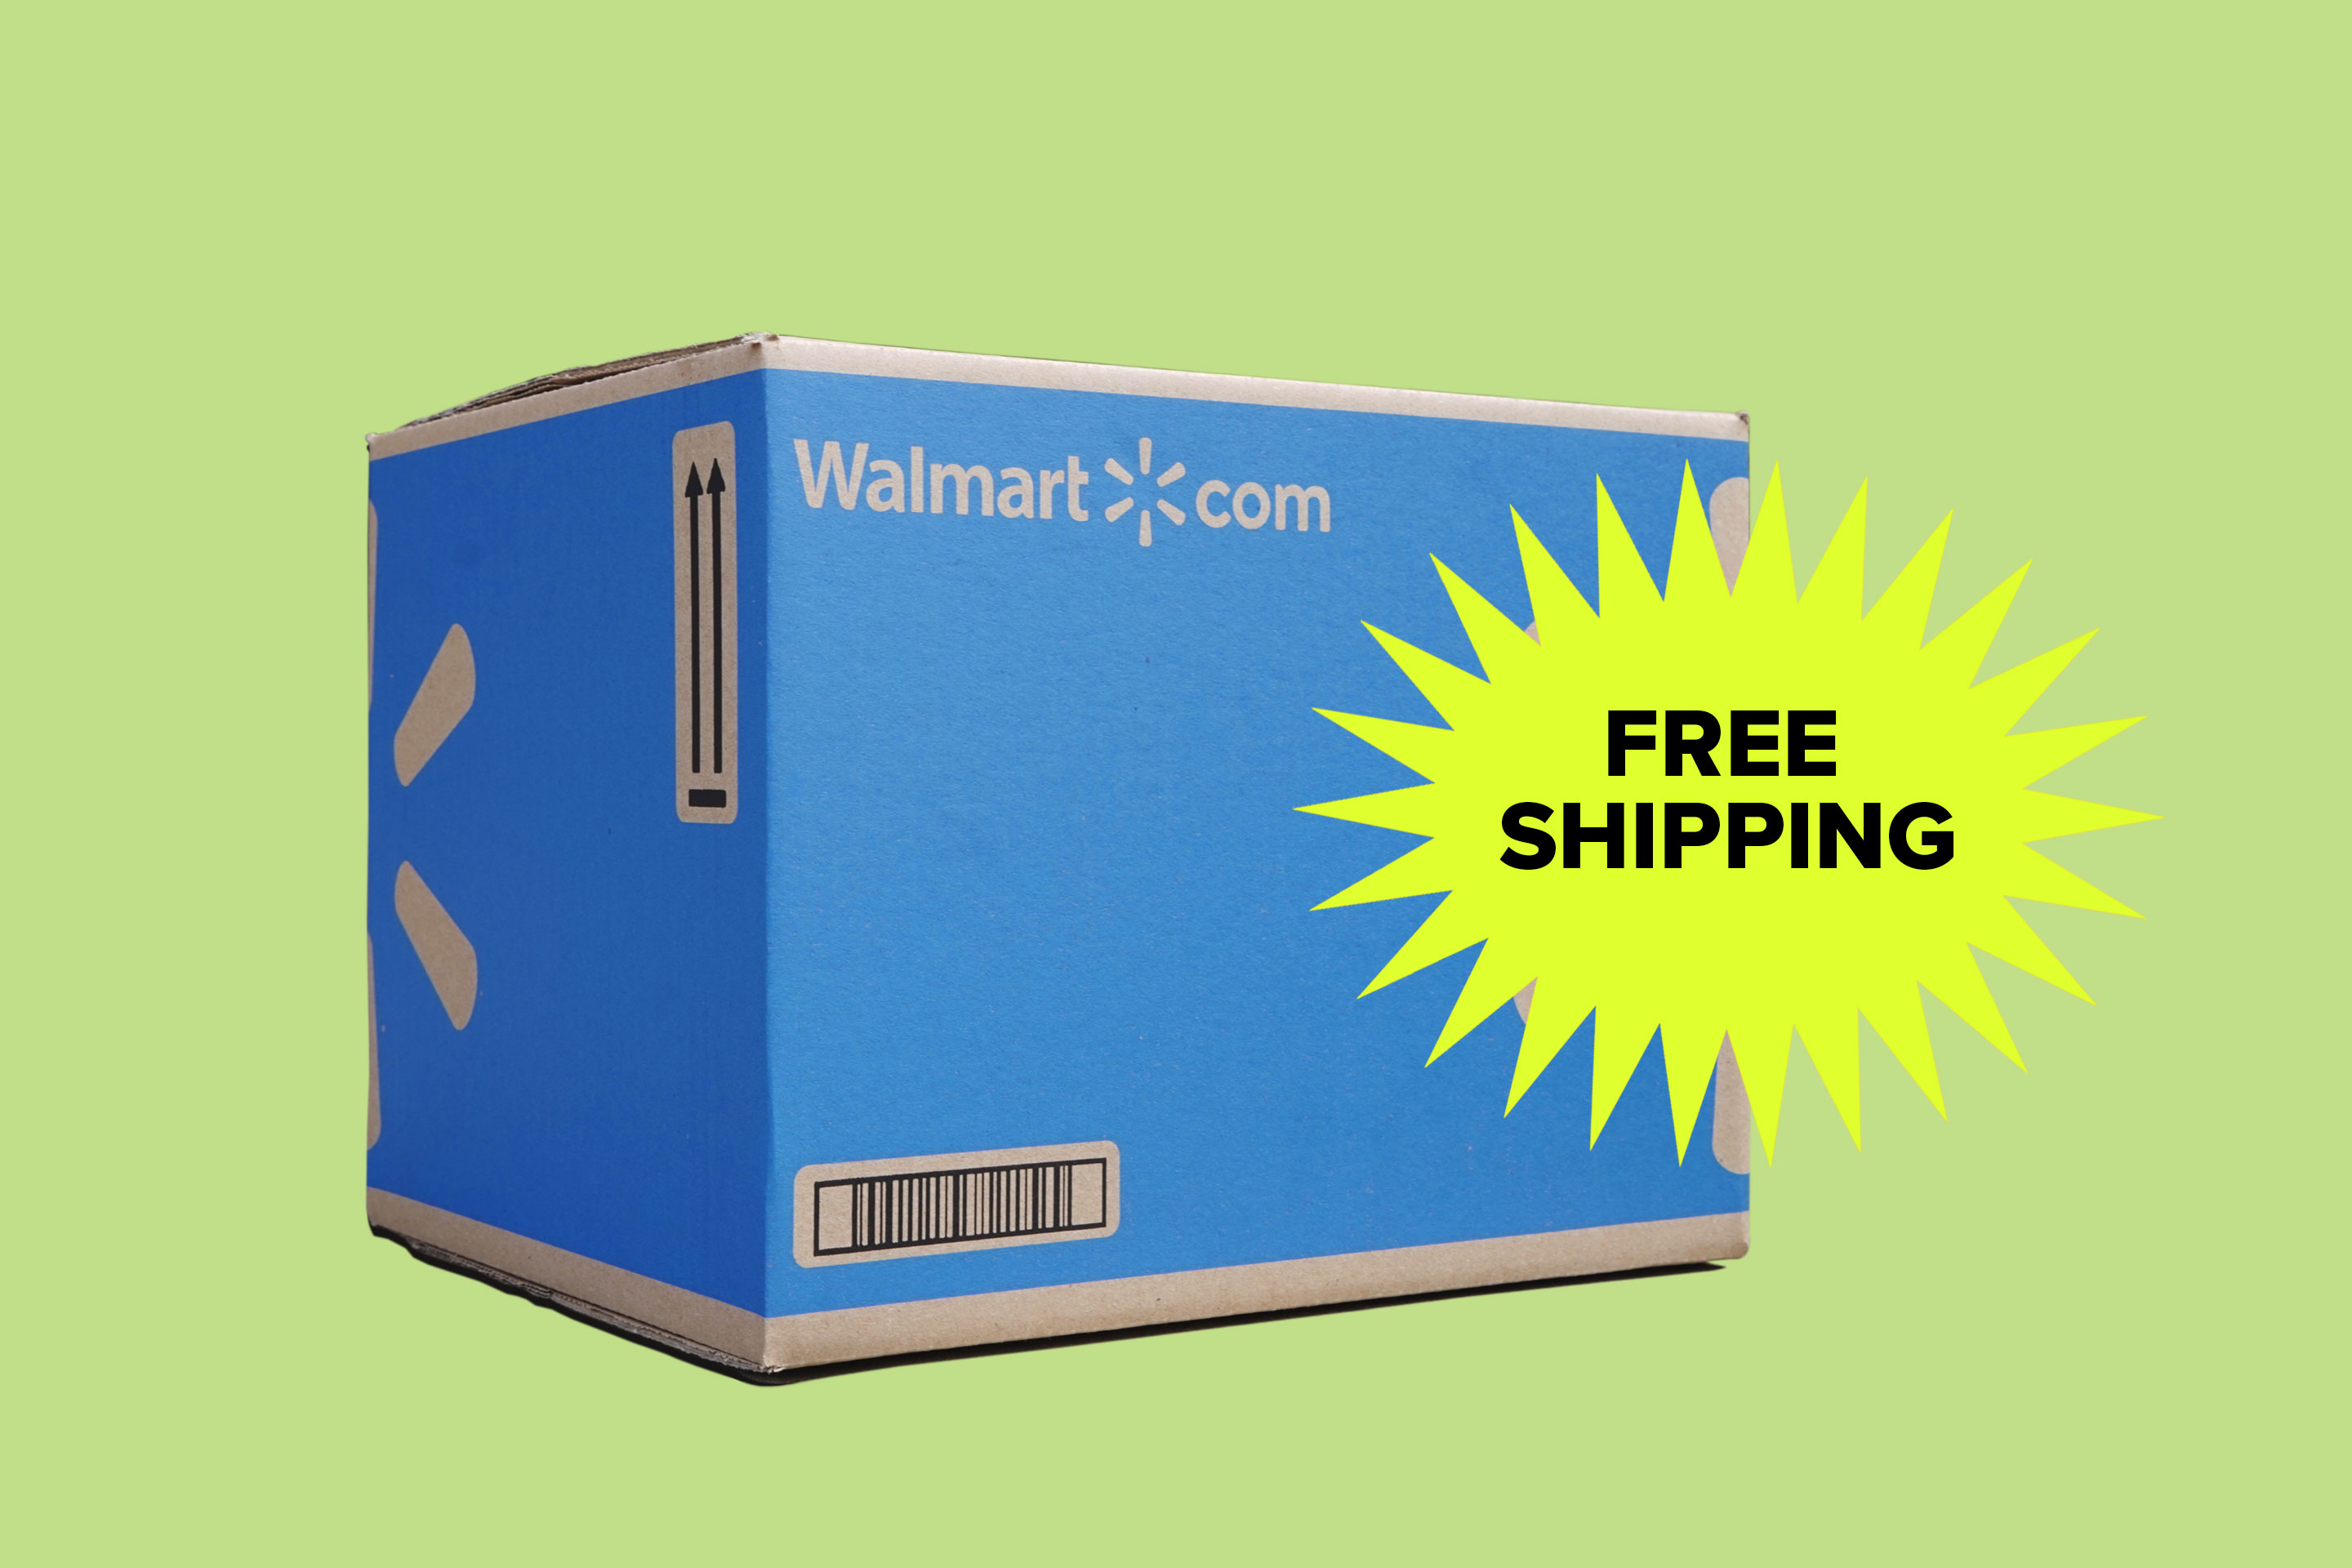 Walmart Is Rolling out a New Free Shipping Option for the 2020 Holidays and Beyond